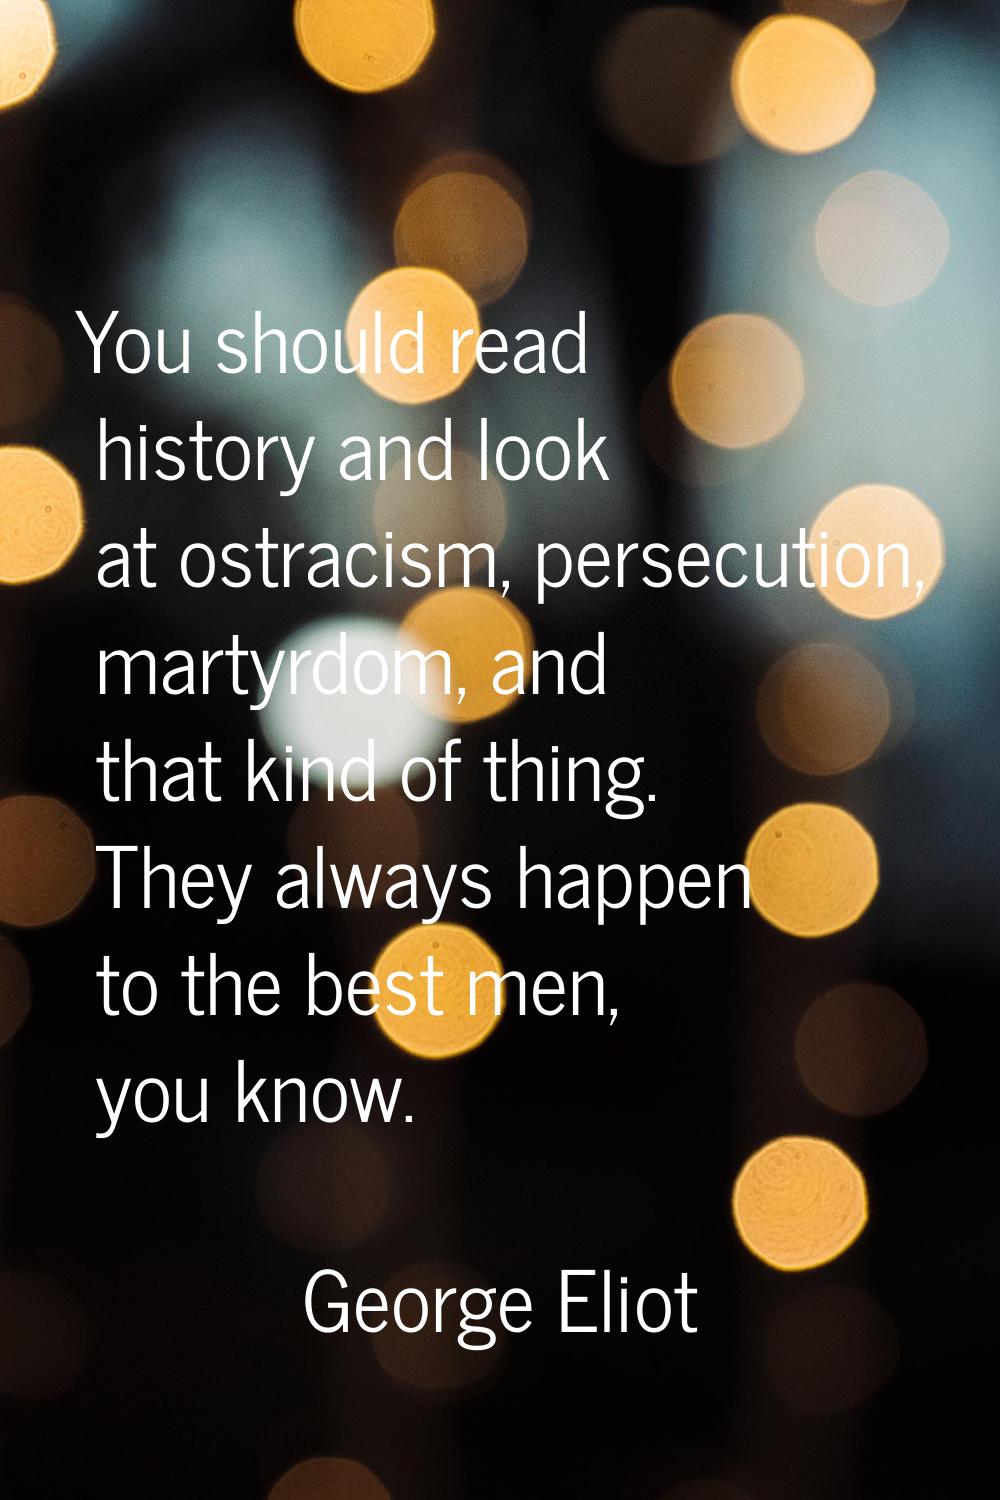 You should read history and look at ostracism, persecution, martyrdom, and that kind of thing. They